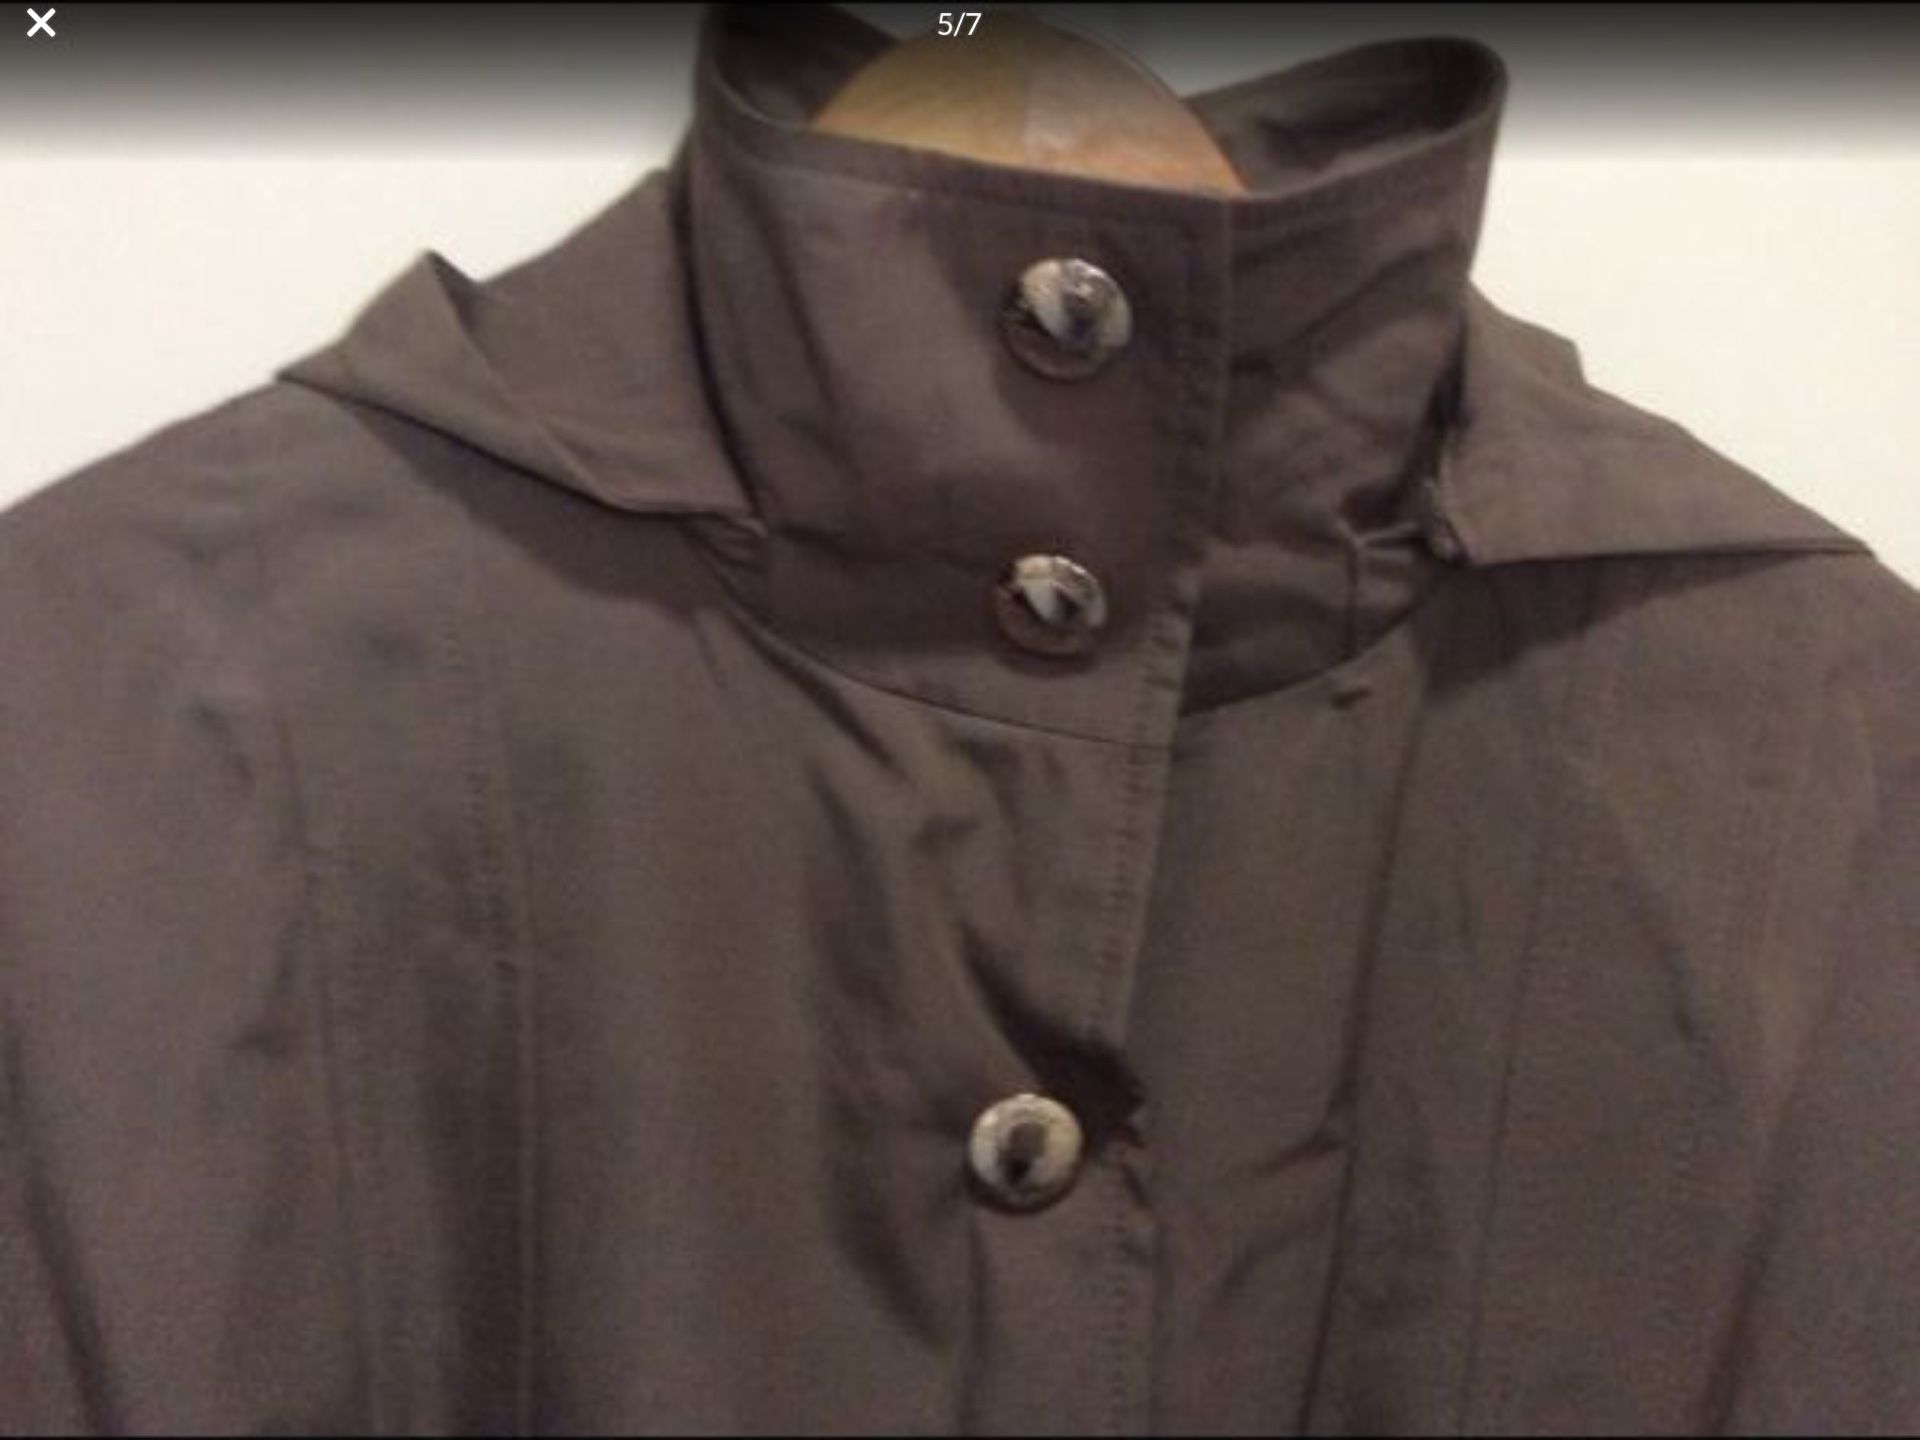 CALVIN KLEIN Cap Jackets, or Overcoat/Raincoat, brand new, Black, Green and Light Brown, S, M, L, XL